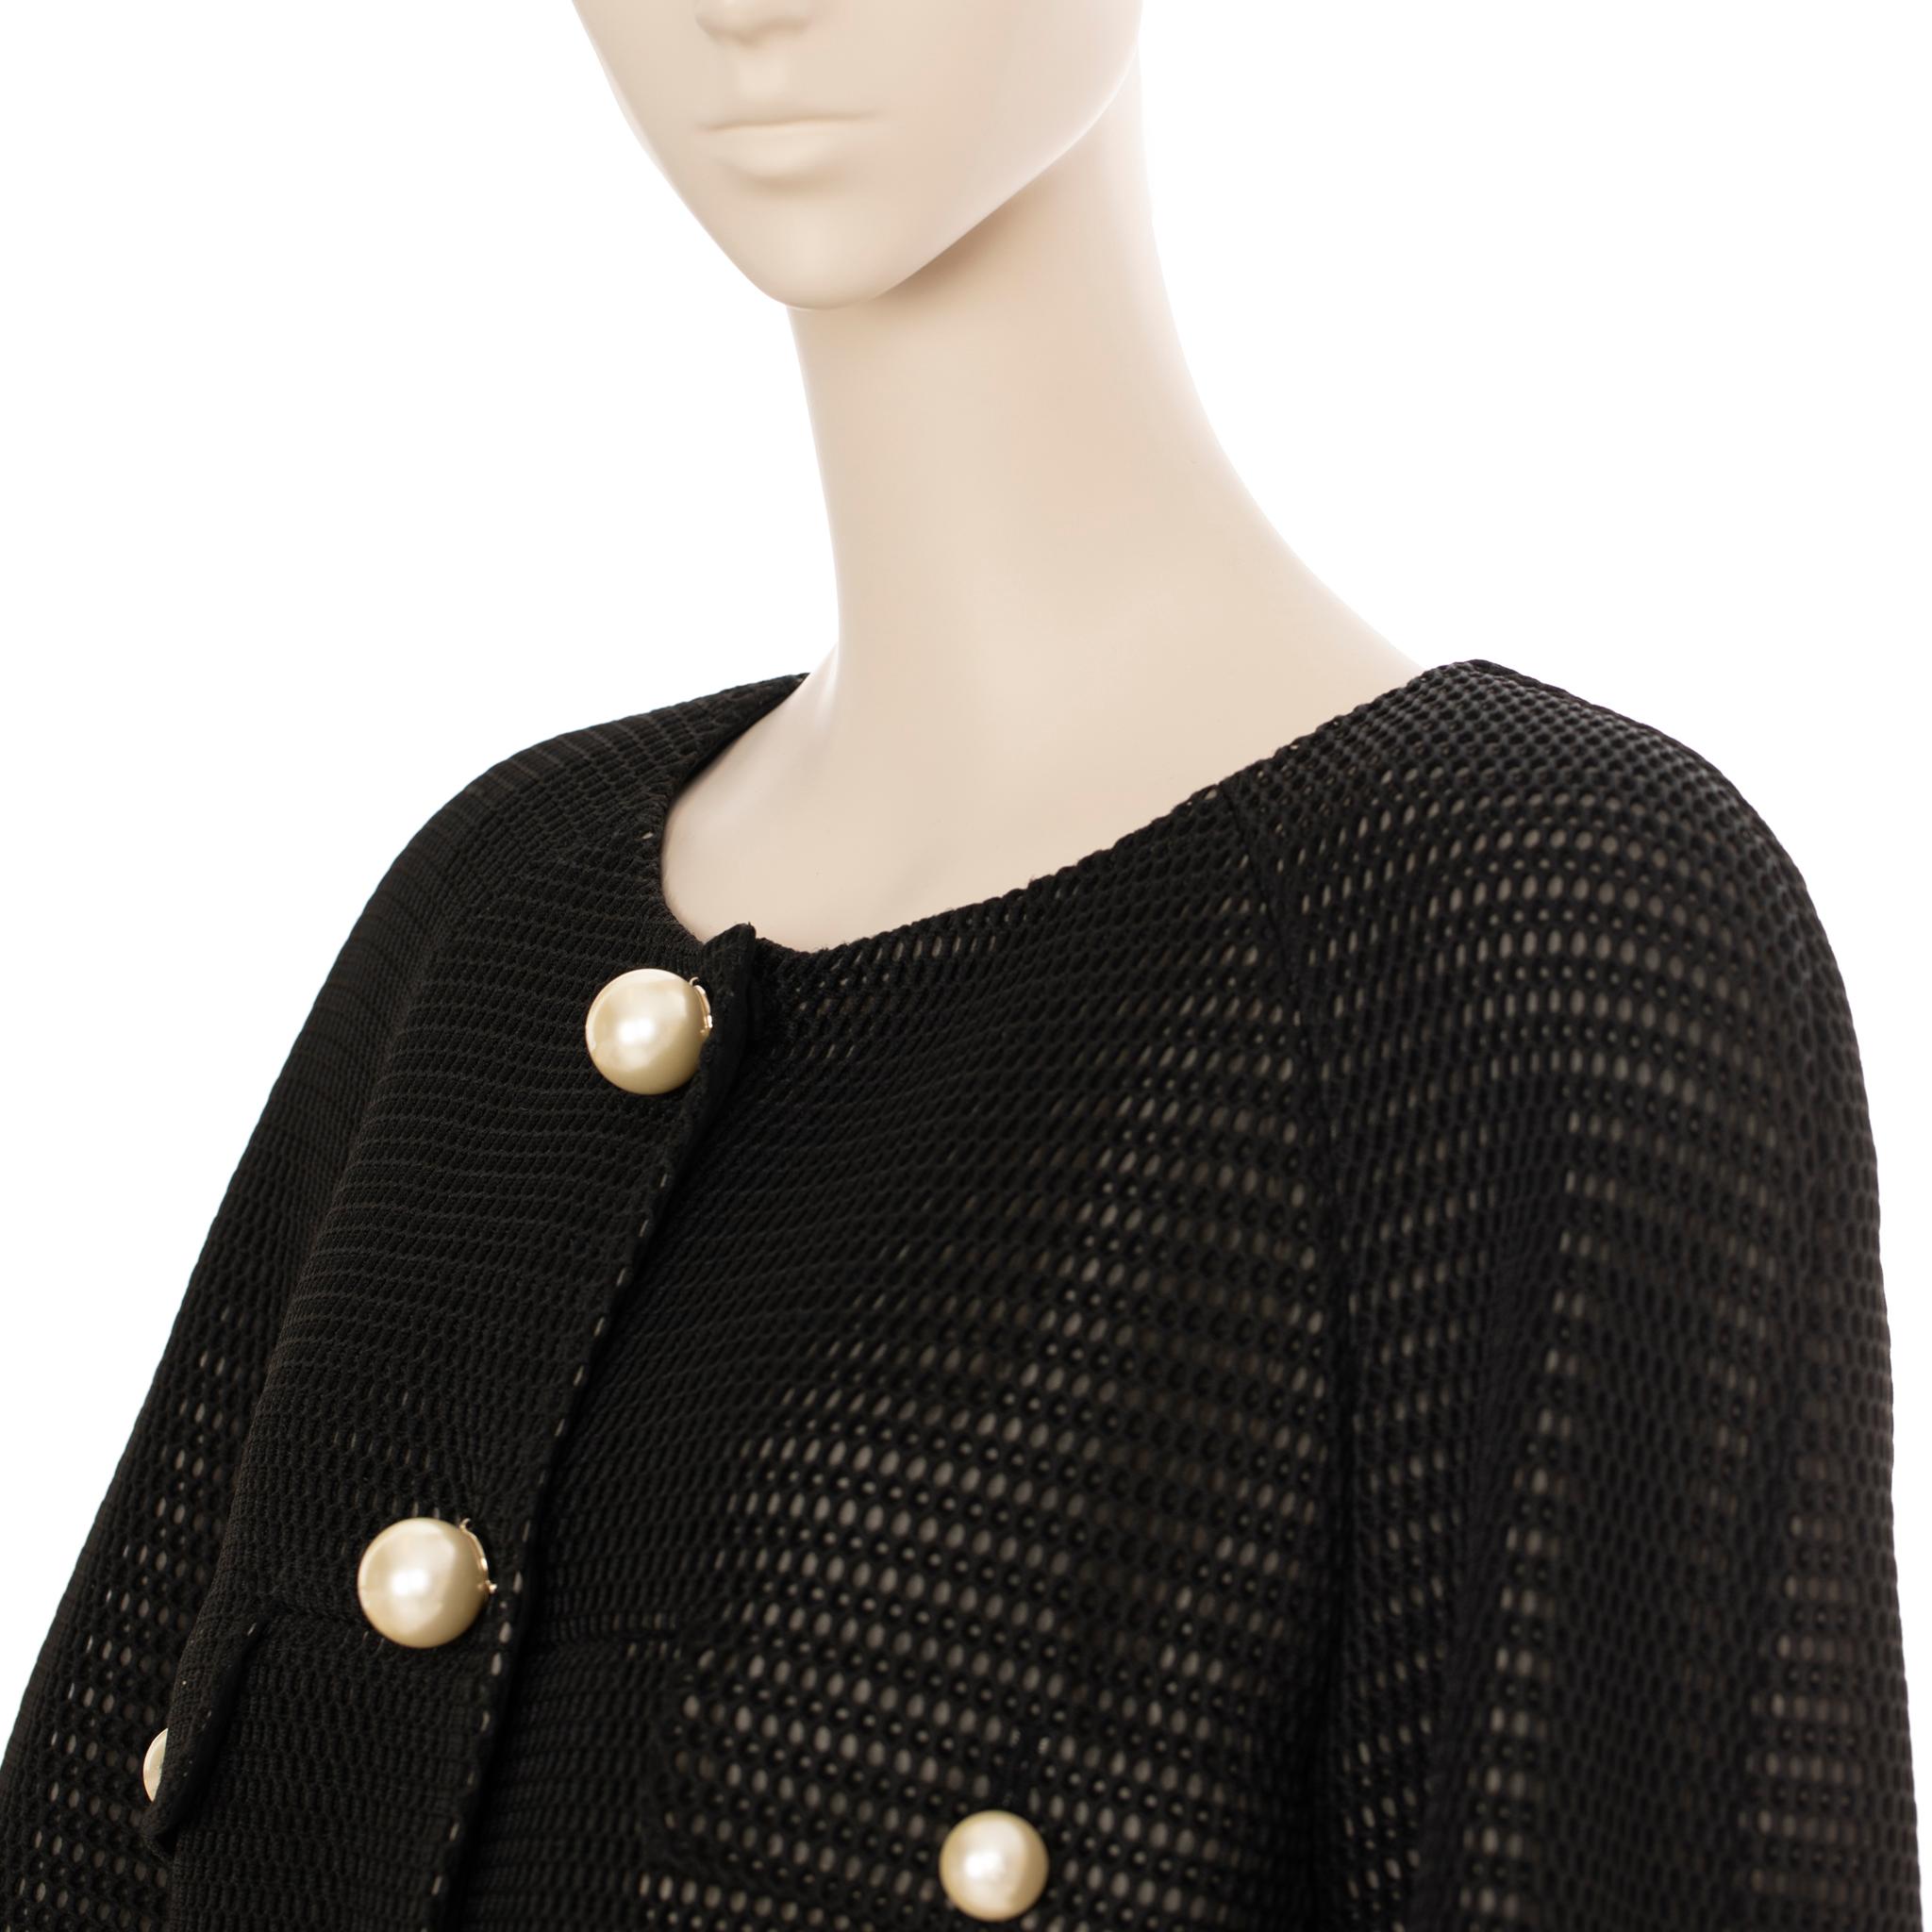 Chanel Crop Mesh Black Jacket With Faux Pearl Details 42 FR For Sale 7